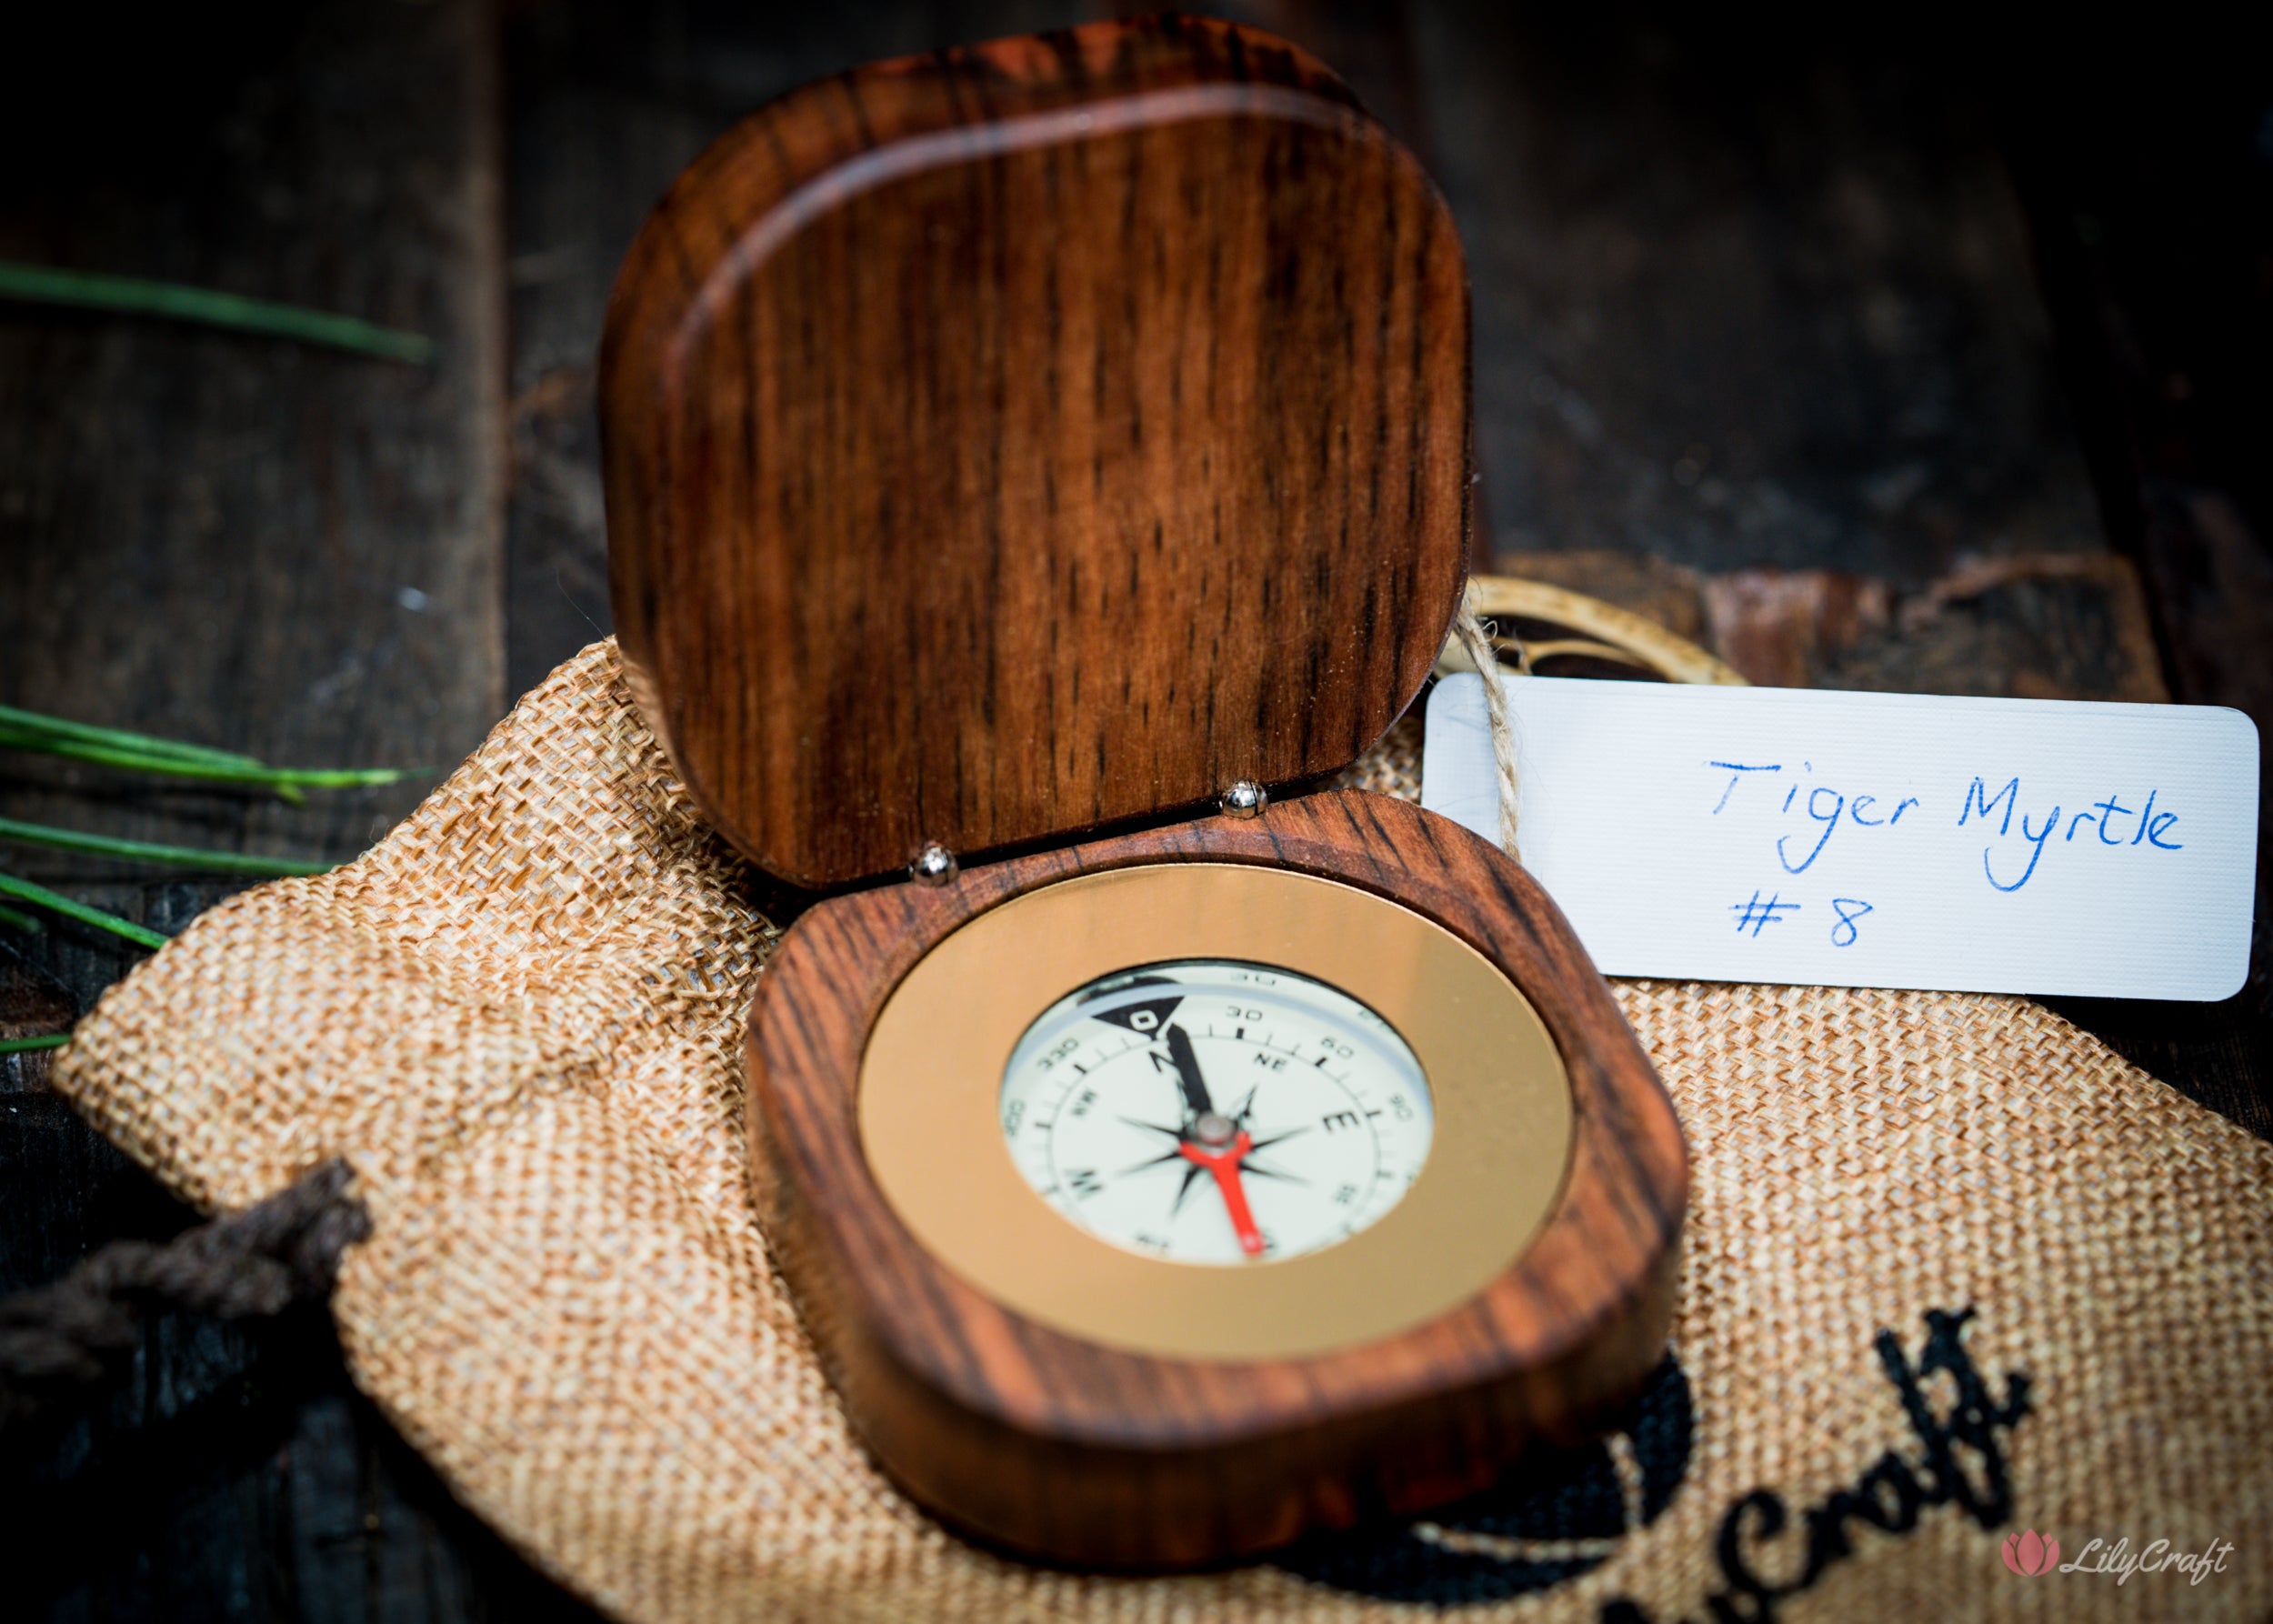 Artisanal compass crafted from sustainably sourced rare woods.